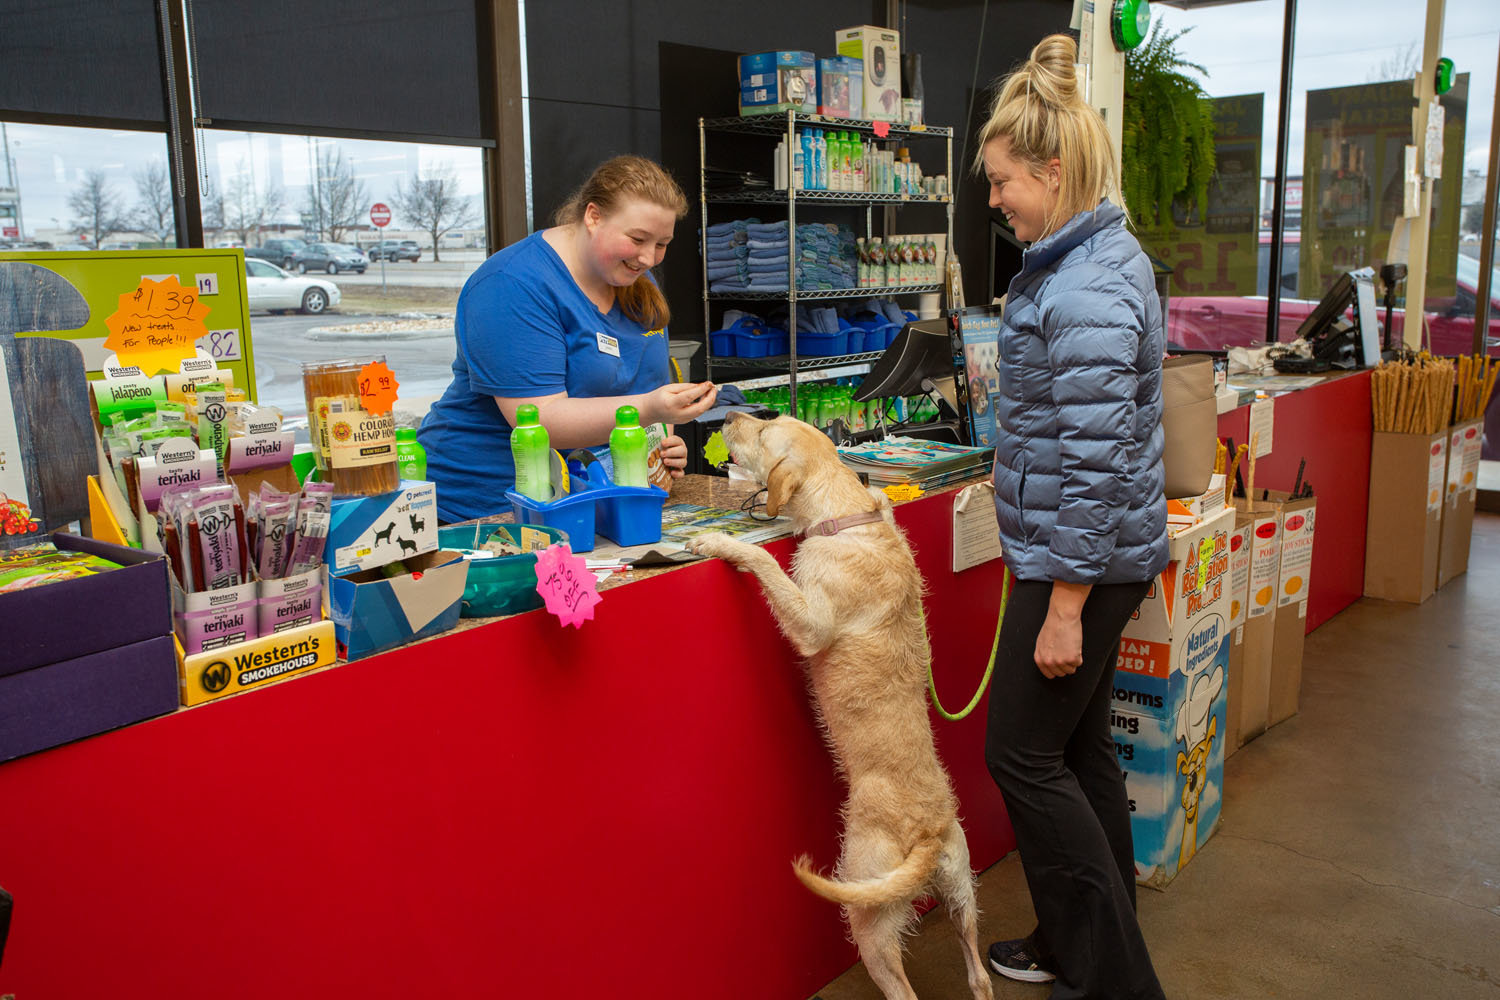 OPEN FOR BUSINESS: Petsway employee Jaimie Hignight, left, cashes out customer Blair Roades and her dog Benley at the pet retailer’s Glenstone Avenue store. Officials say no local stores are expected to close.